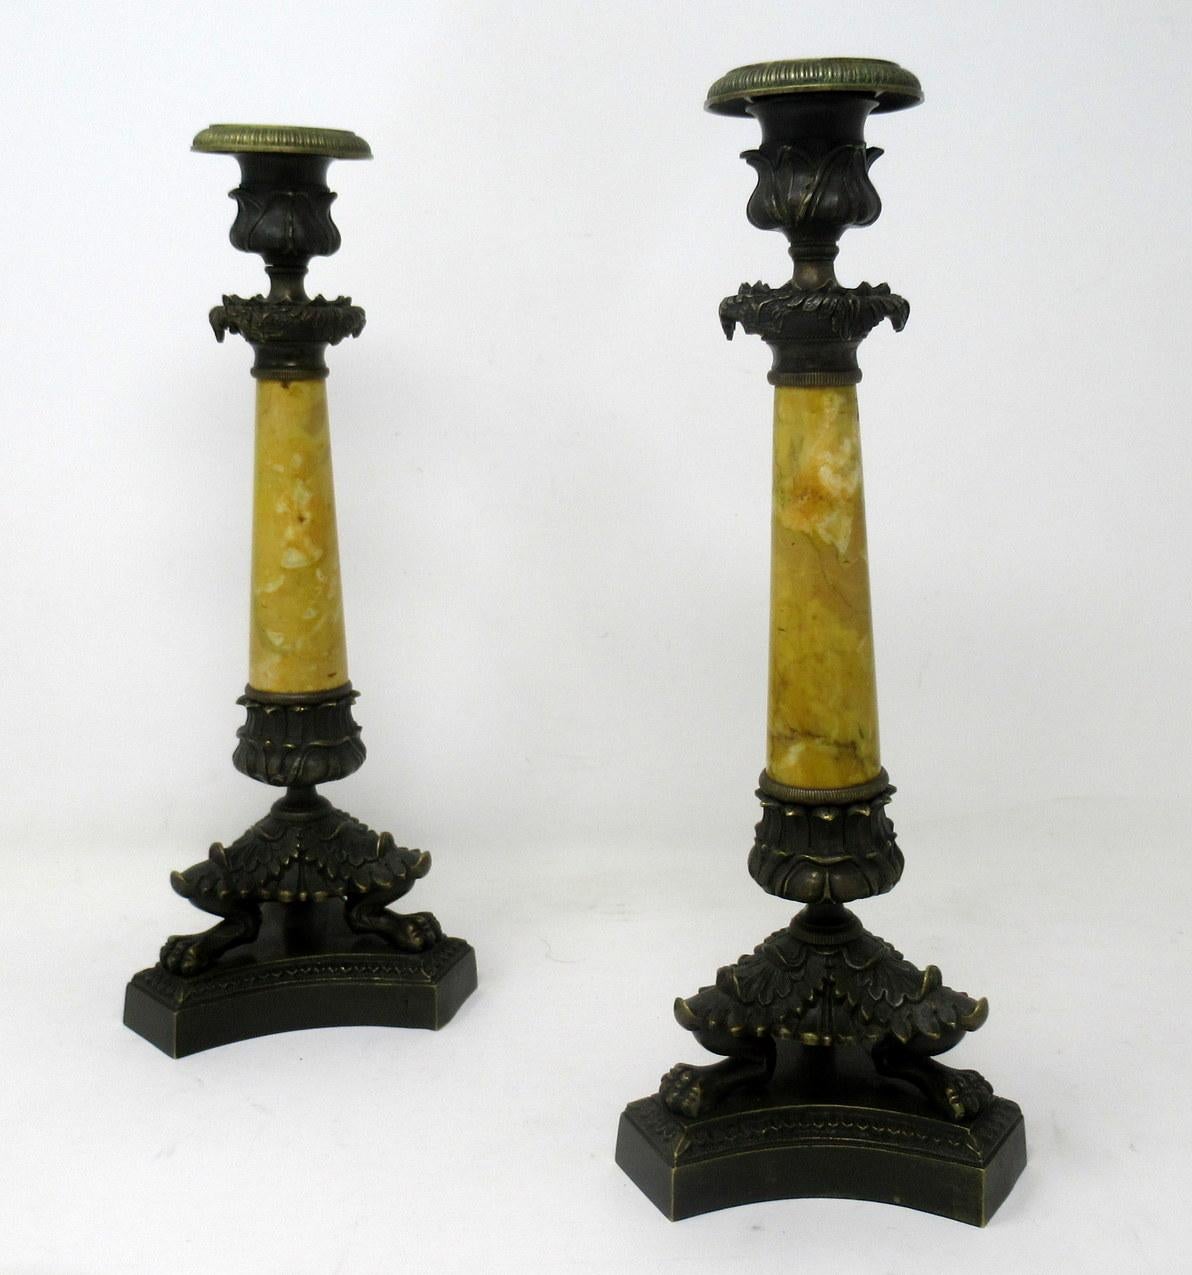 A very fine pair of French bronze and well grained sienna marble grand tour single light table or mantle candlesticks of medium size, outstanding workmanship quality with good heavy gauge chisel cast mounts throughout, first quarter of the 19th